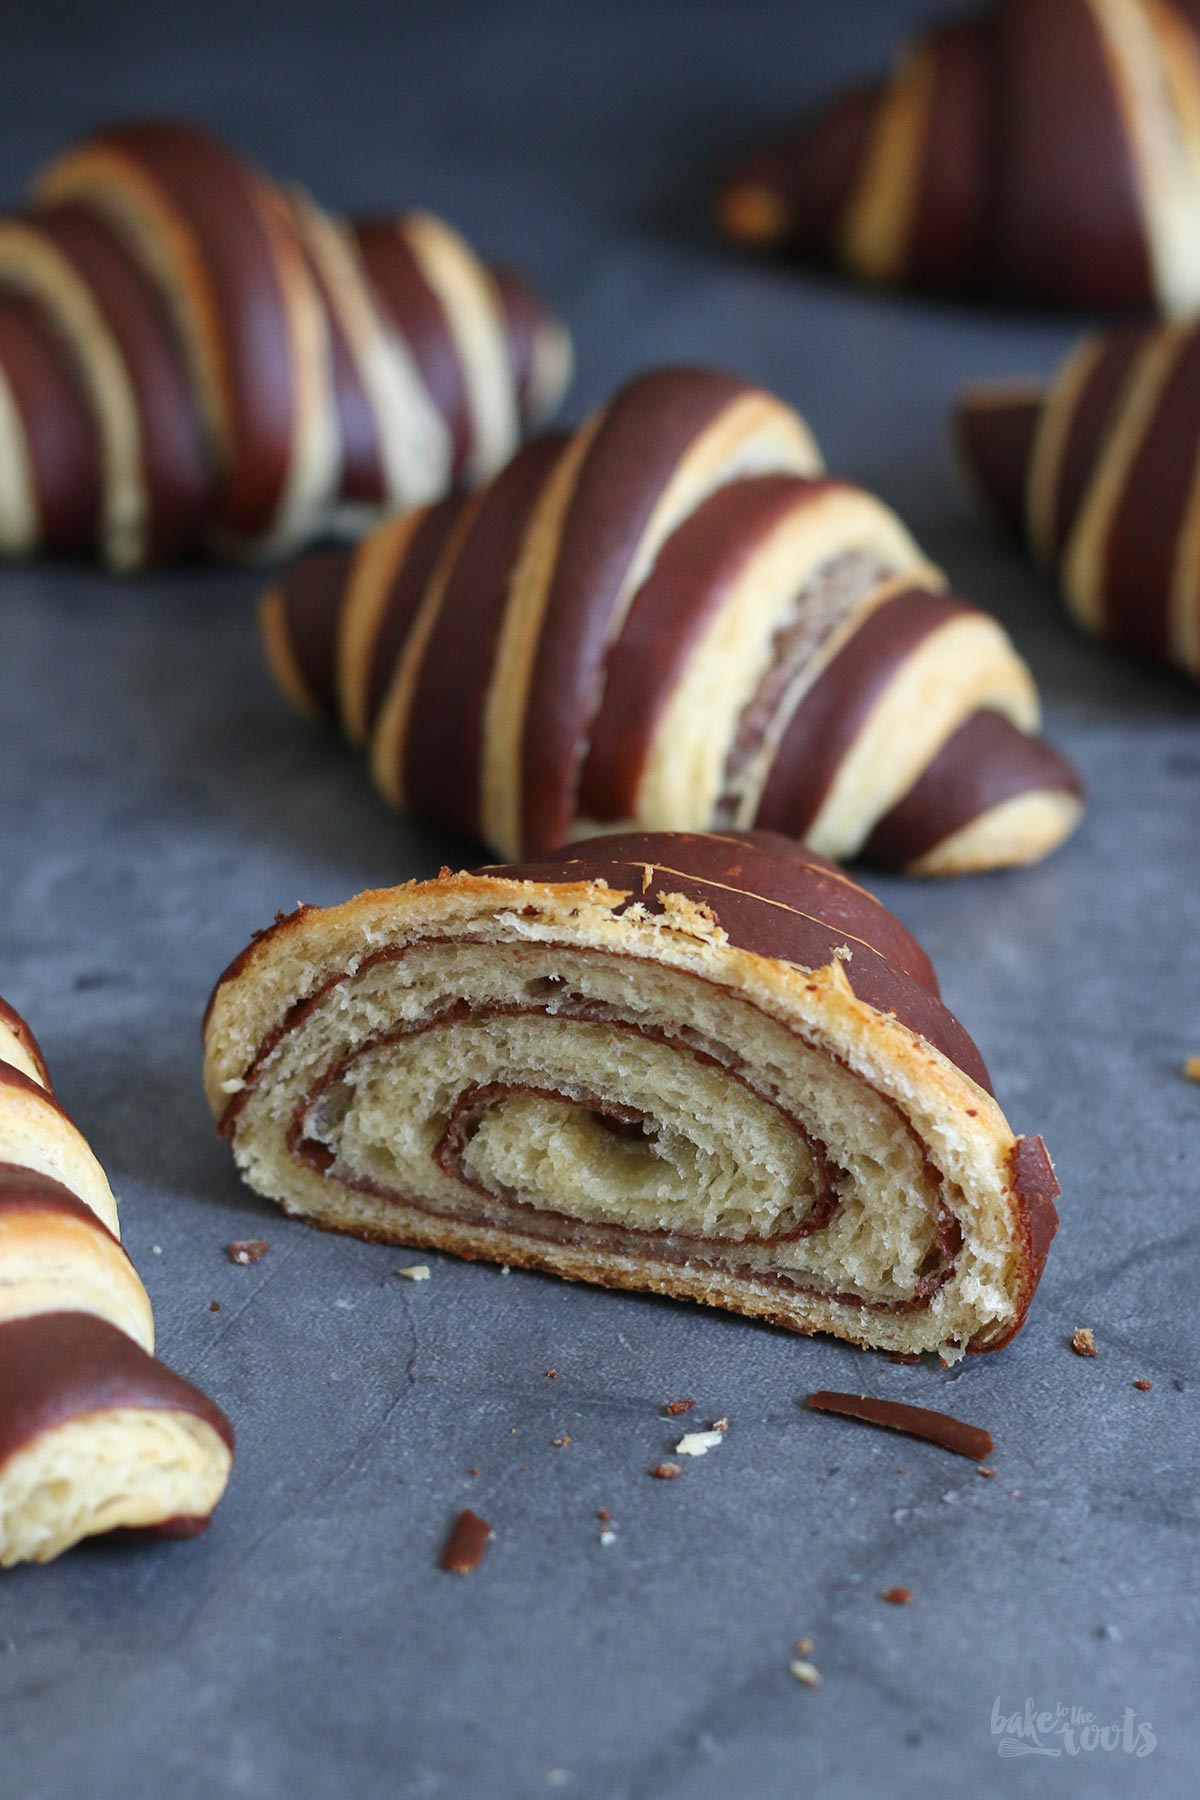 Chocolate Croissants | Bake to the roots